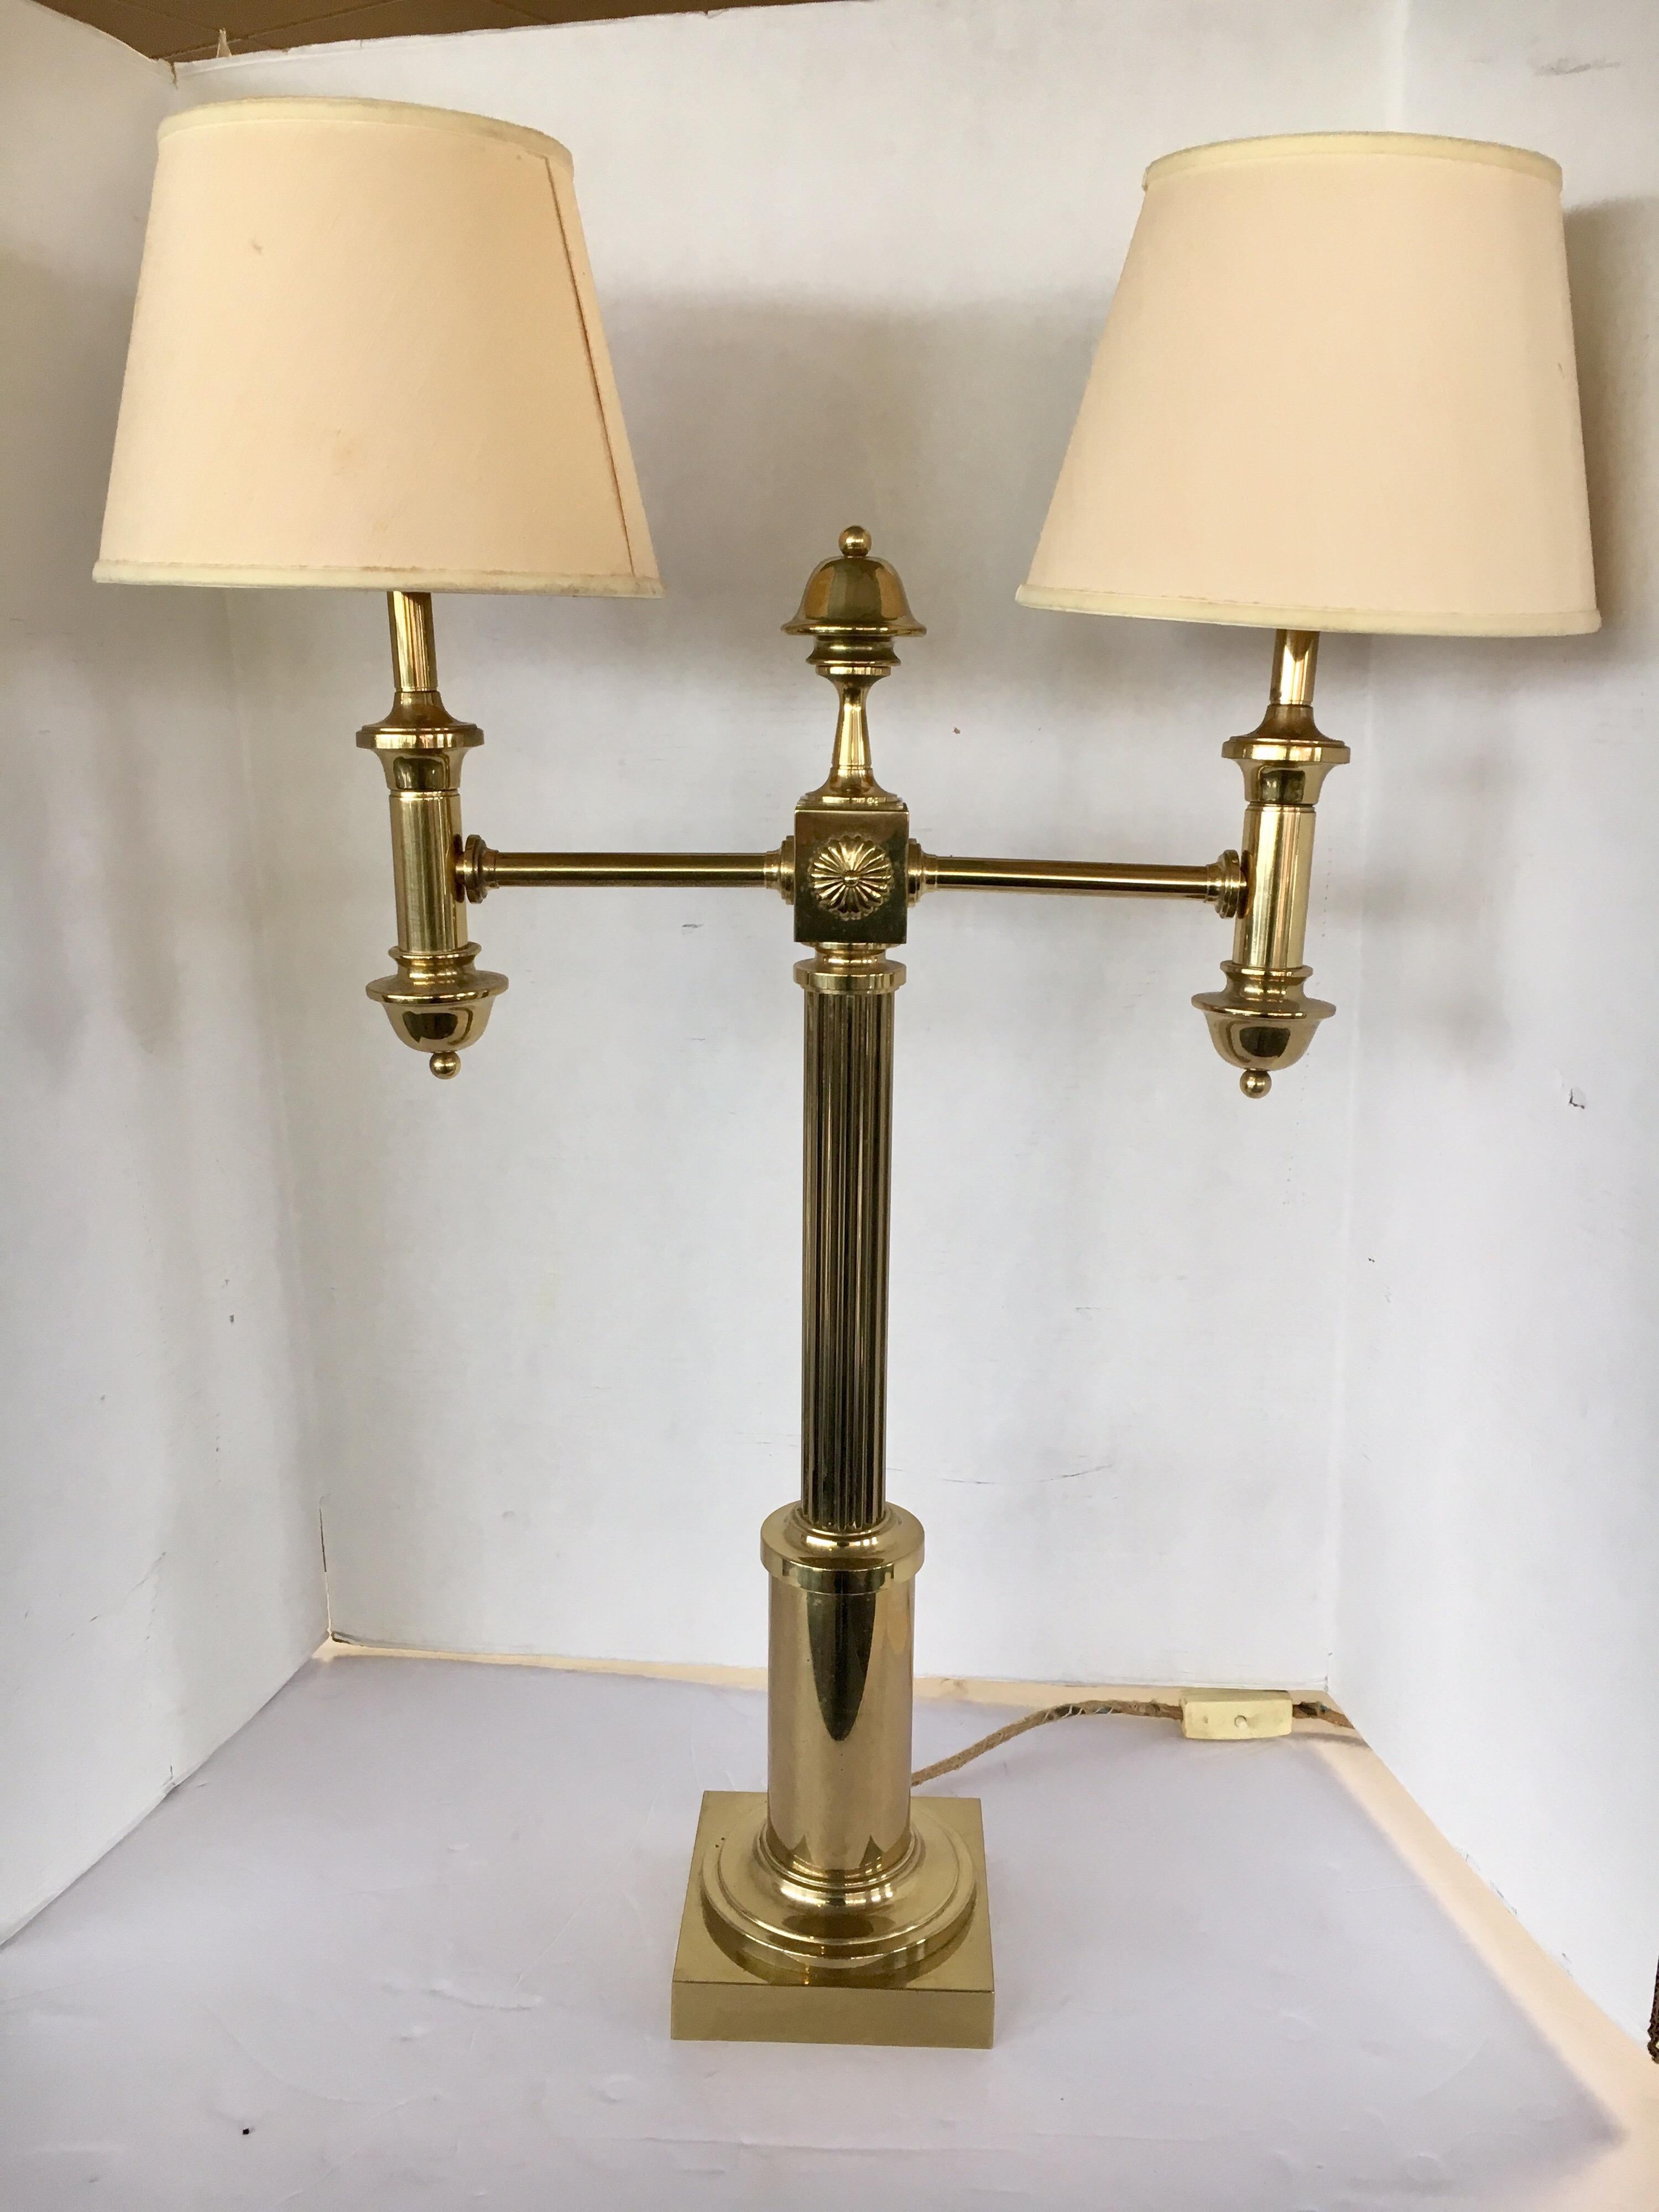 Elegant and tall two-arm brass table lamp that looks like it belongs in the White House. Wired for US and in perfect working condition.